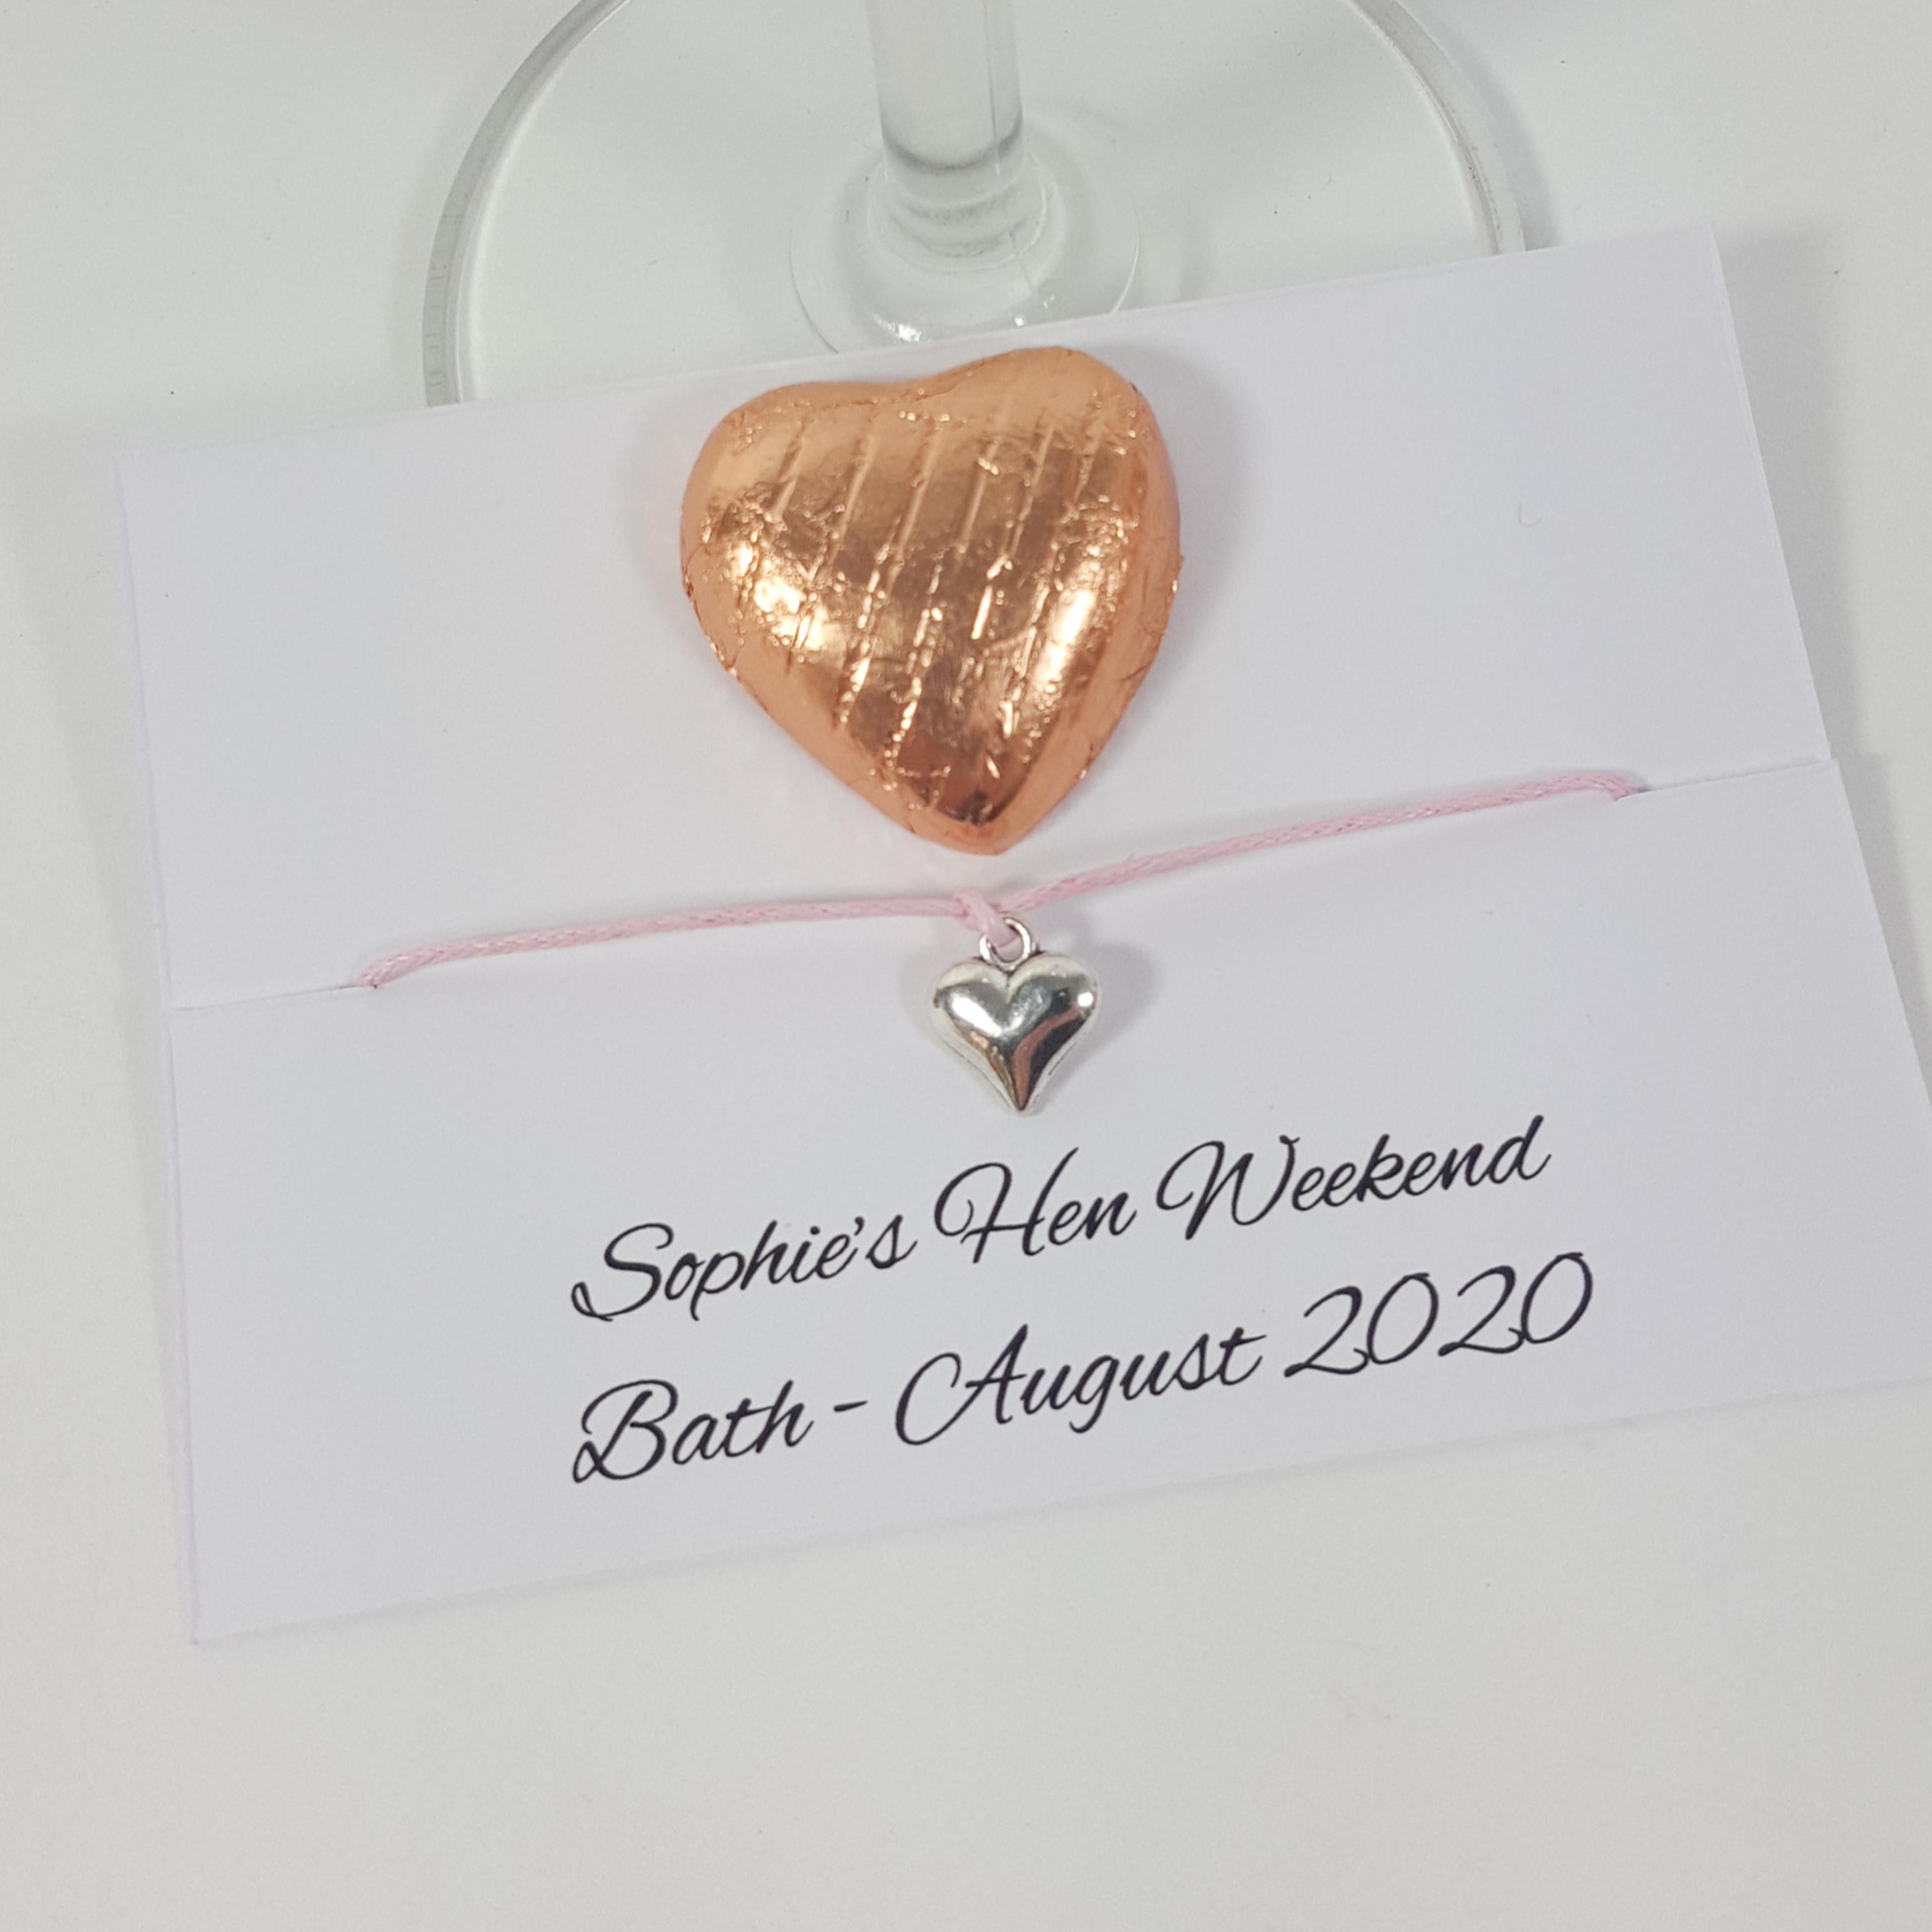 Hen party bracelet and chocolate heart favour